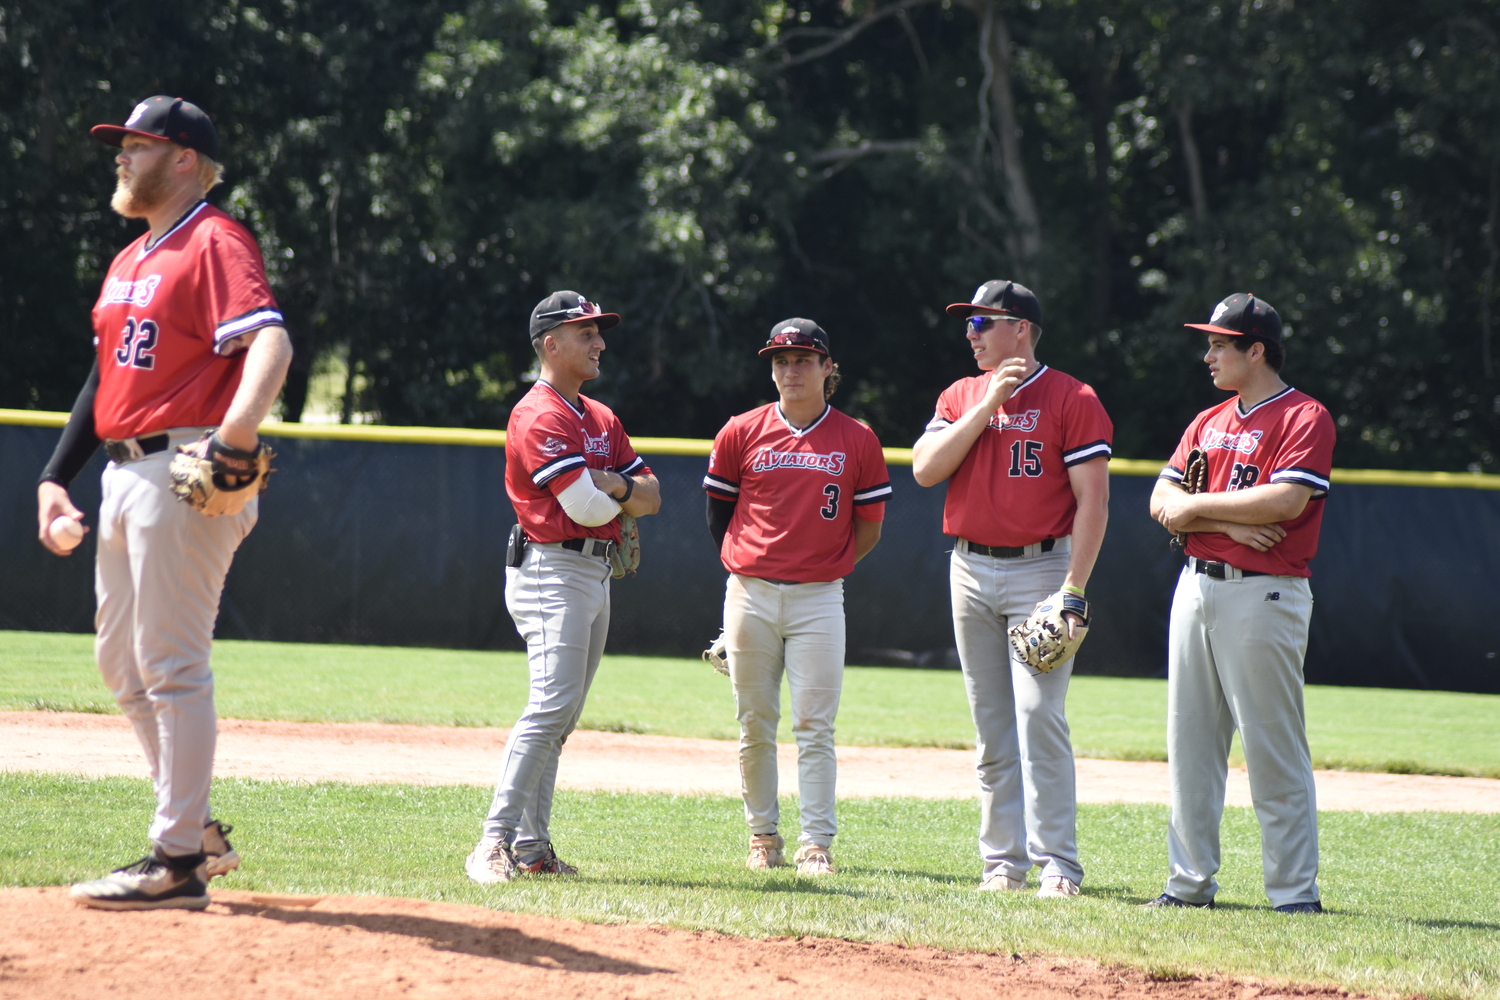 The Aviators watch on as teammate Atley Jacome takes his warm up pitches. Westhampton is the top seed going into this week’s playoffs and began play with the Southampton Breakers in one of the semifinal series that started on Tuesday.   DREW BUDD